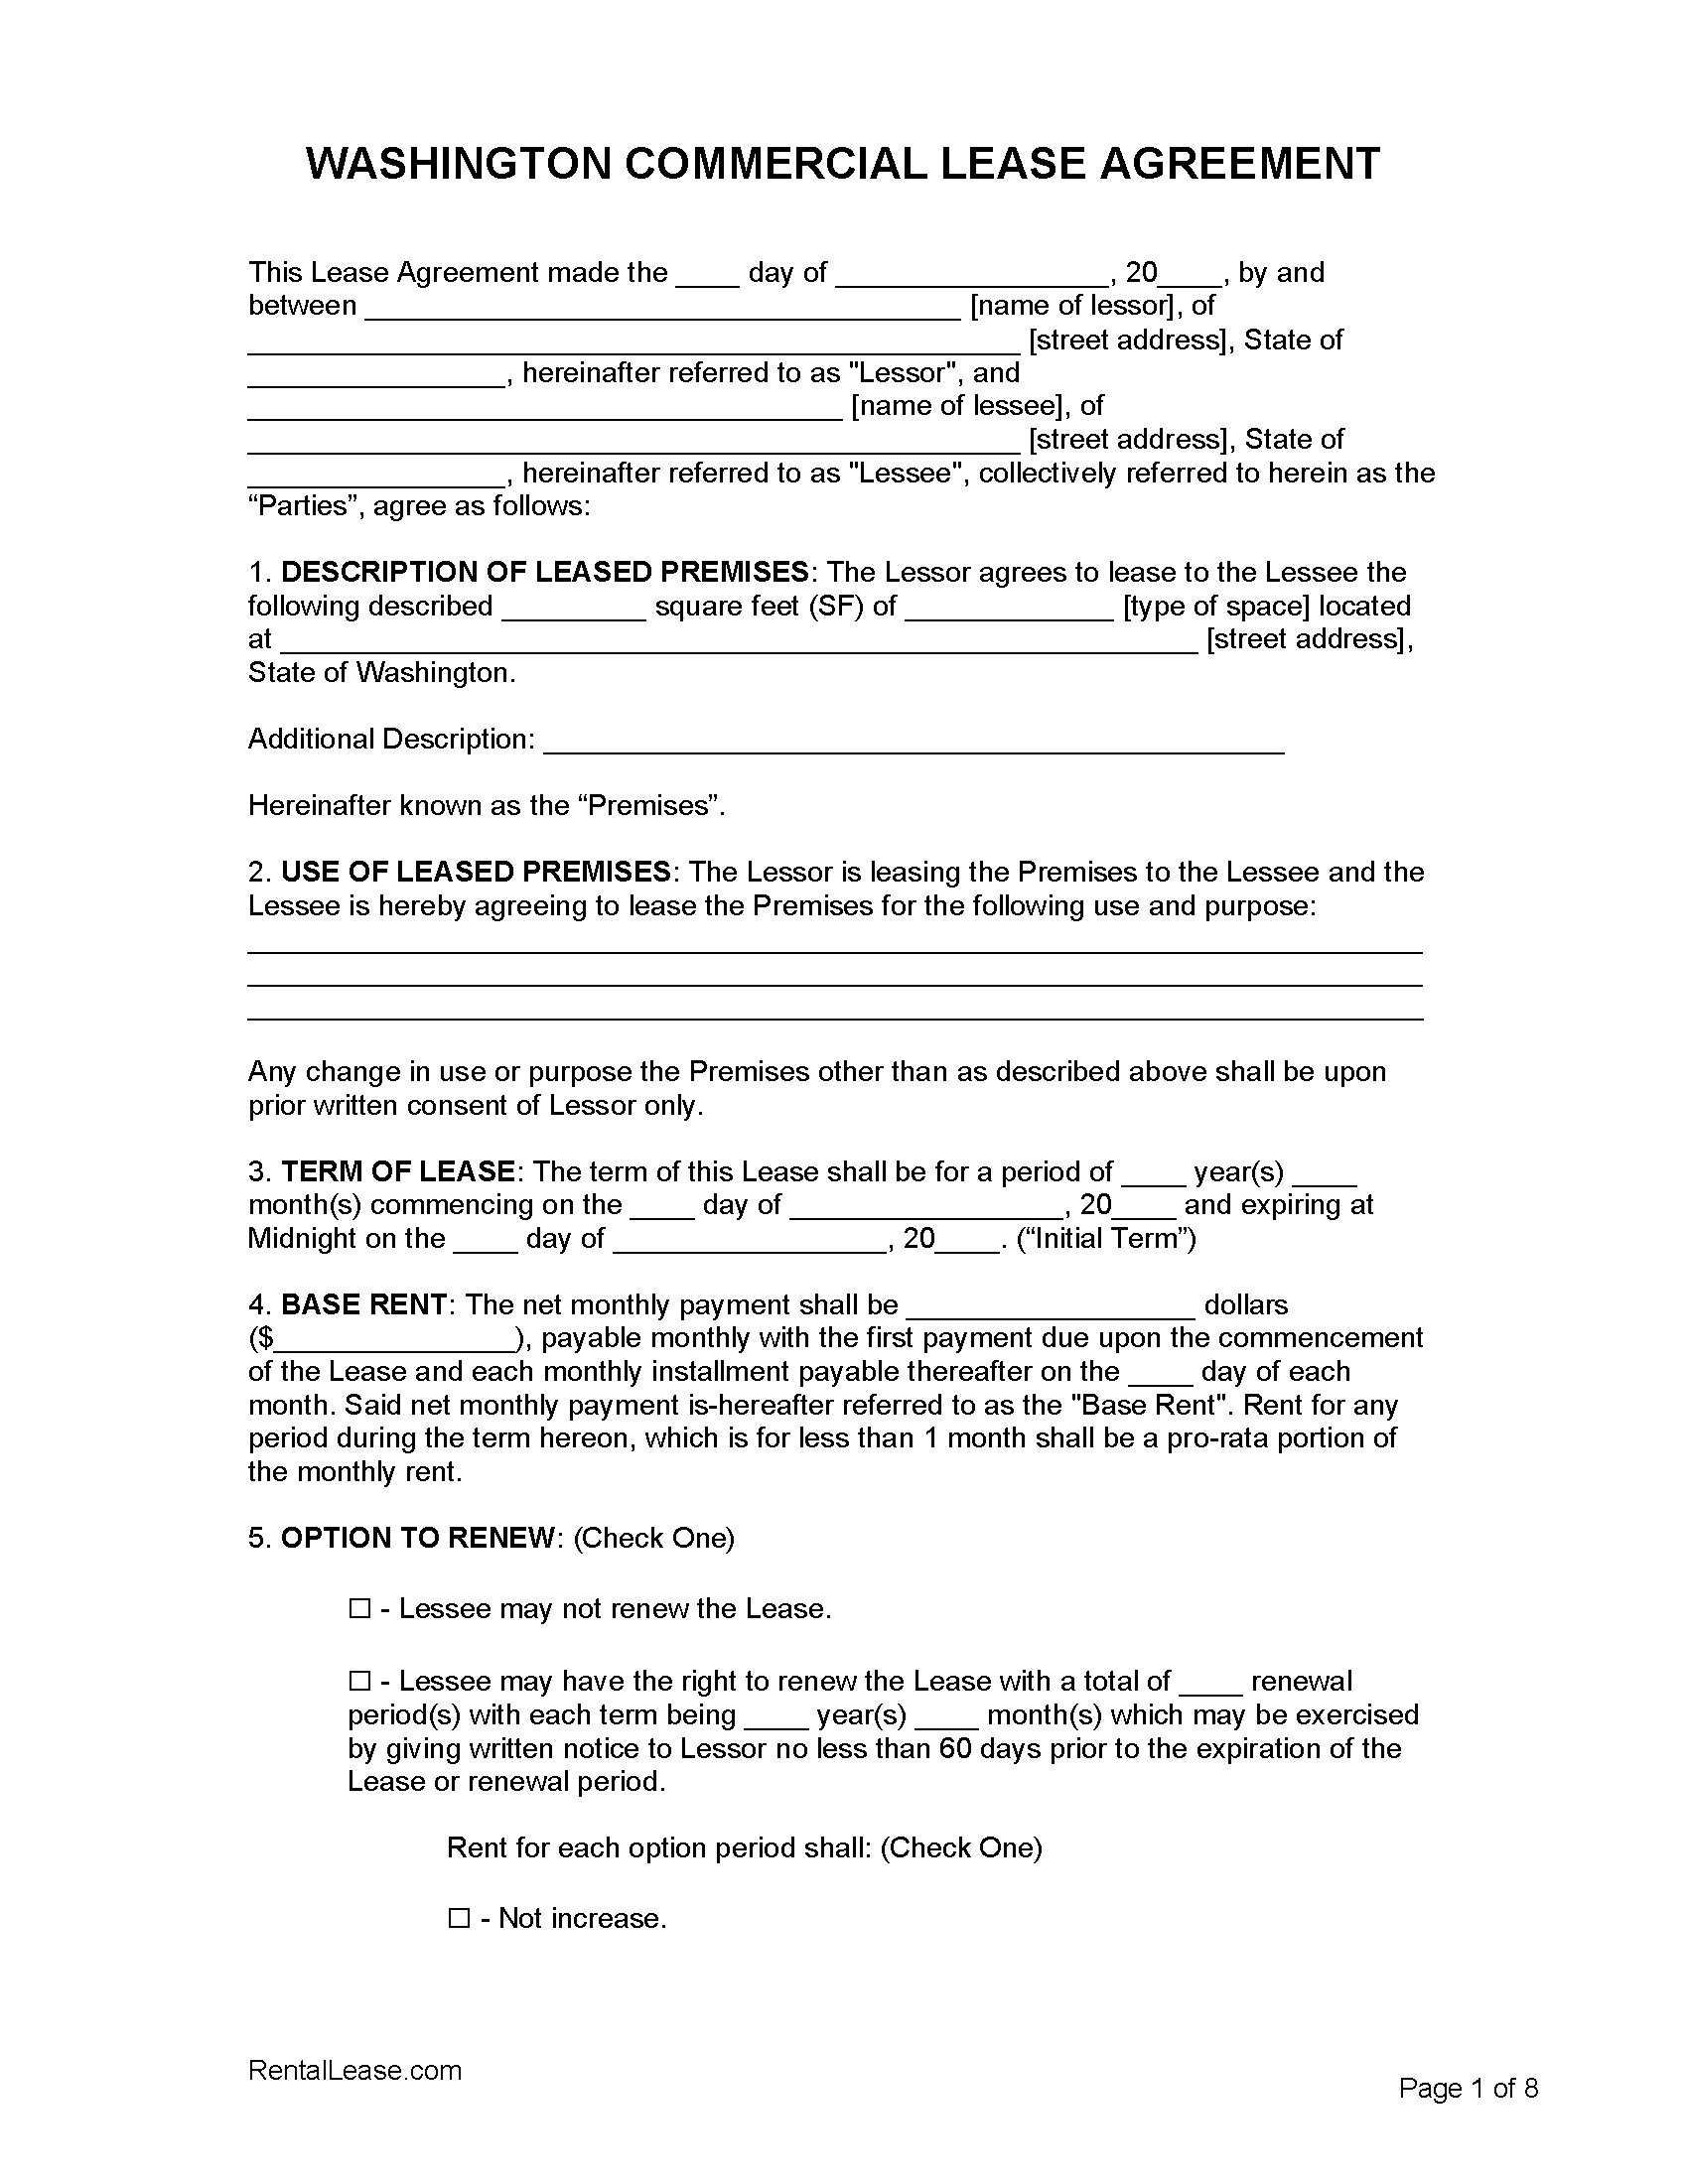 free-washington-commercial-lease-agreement-template-pdf-word